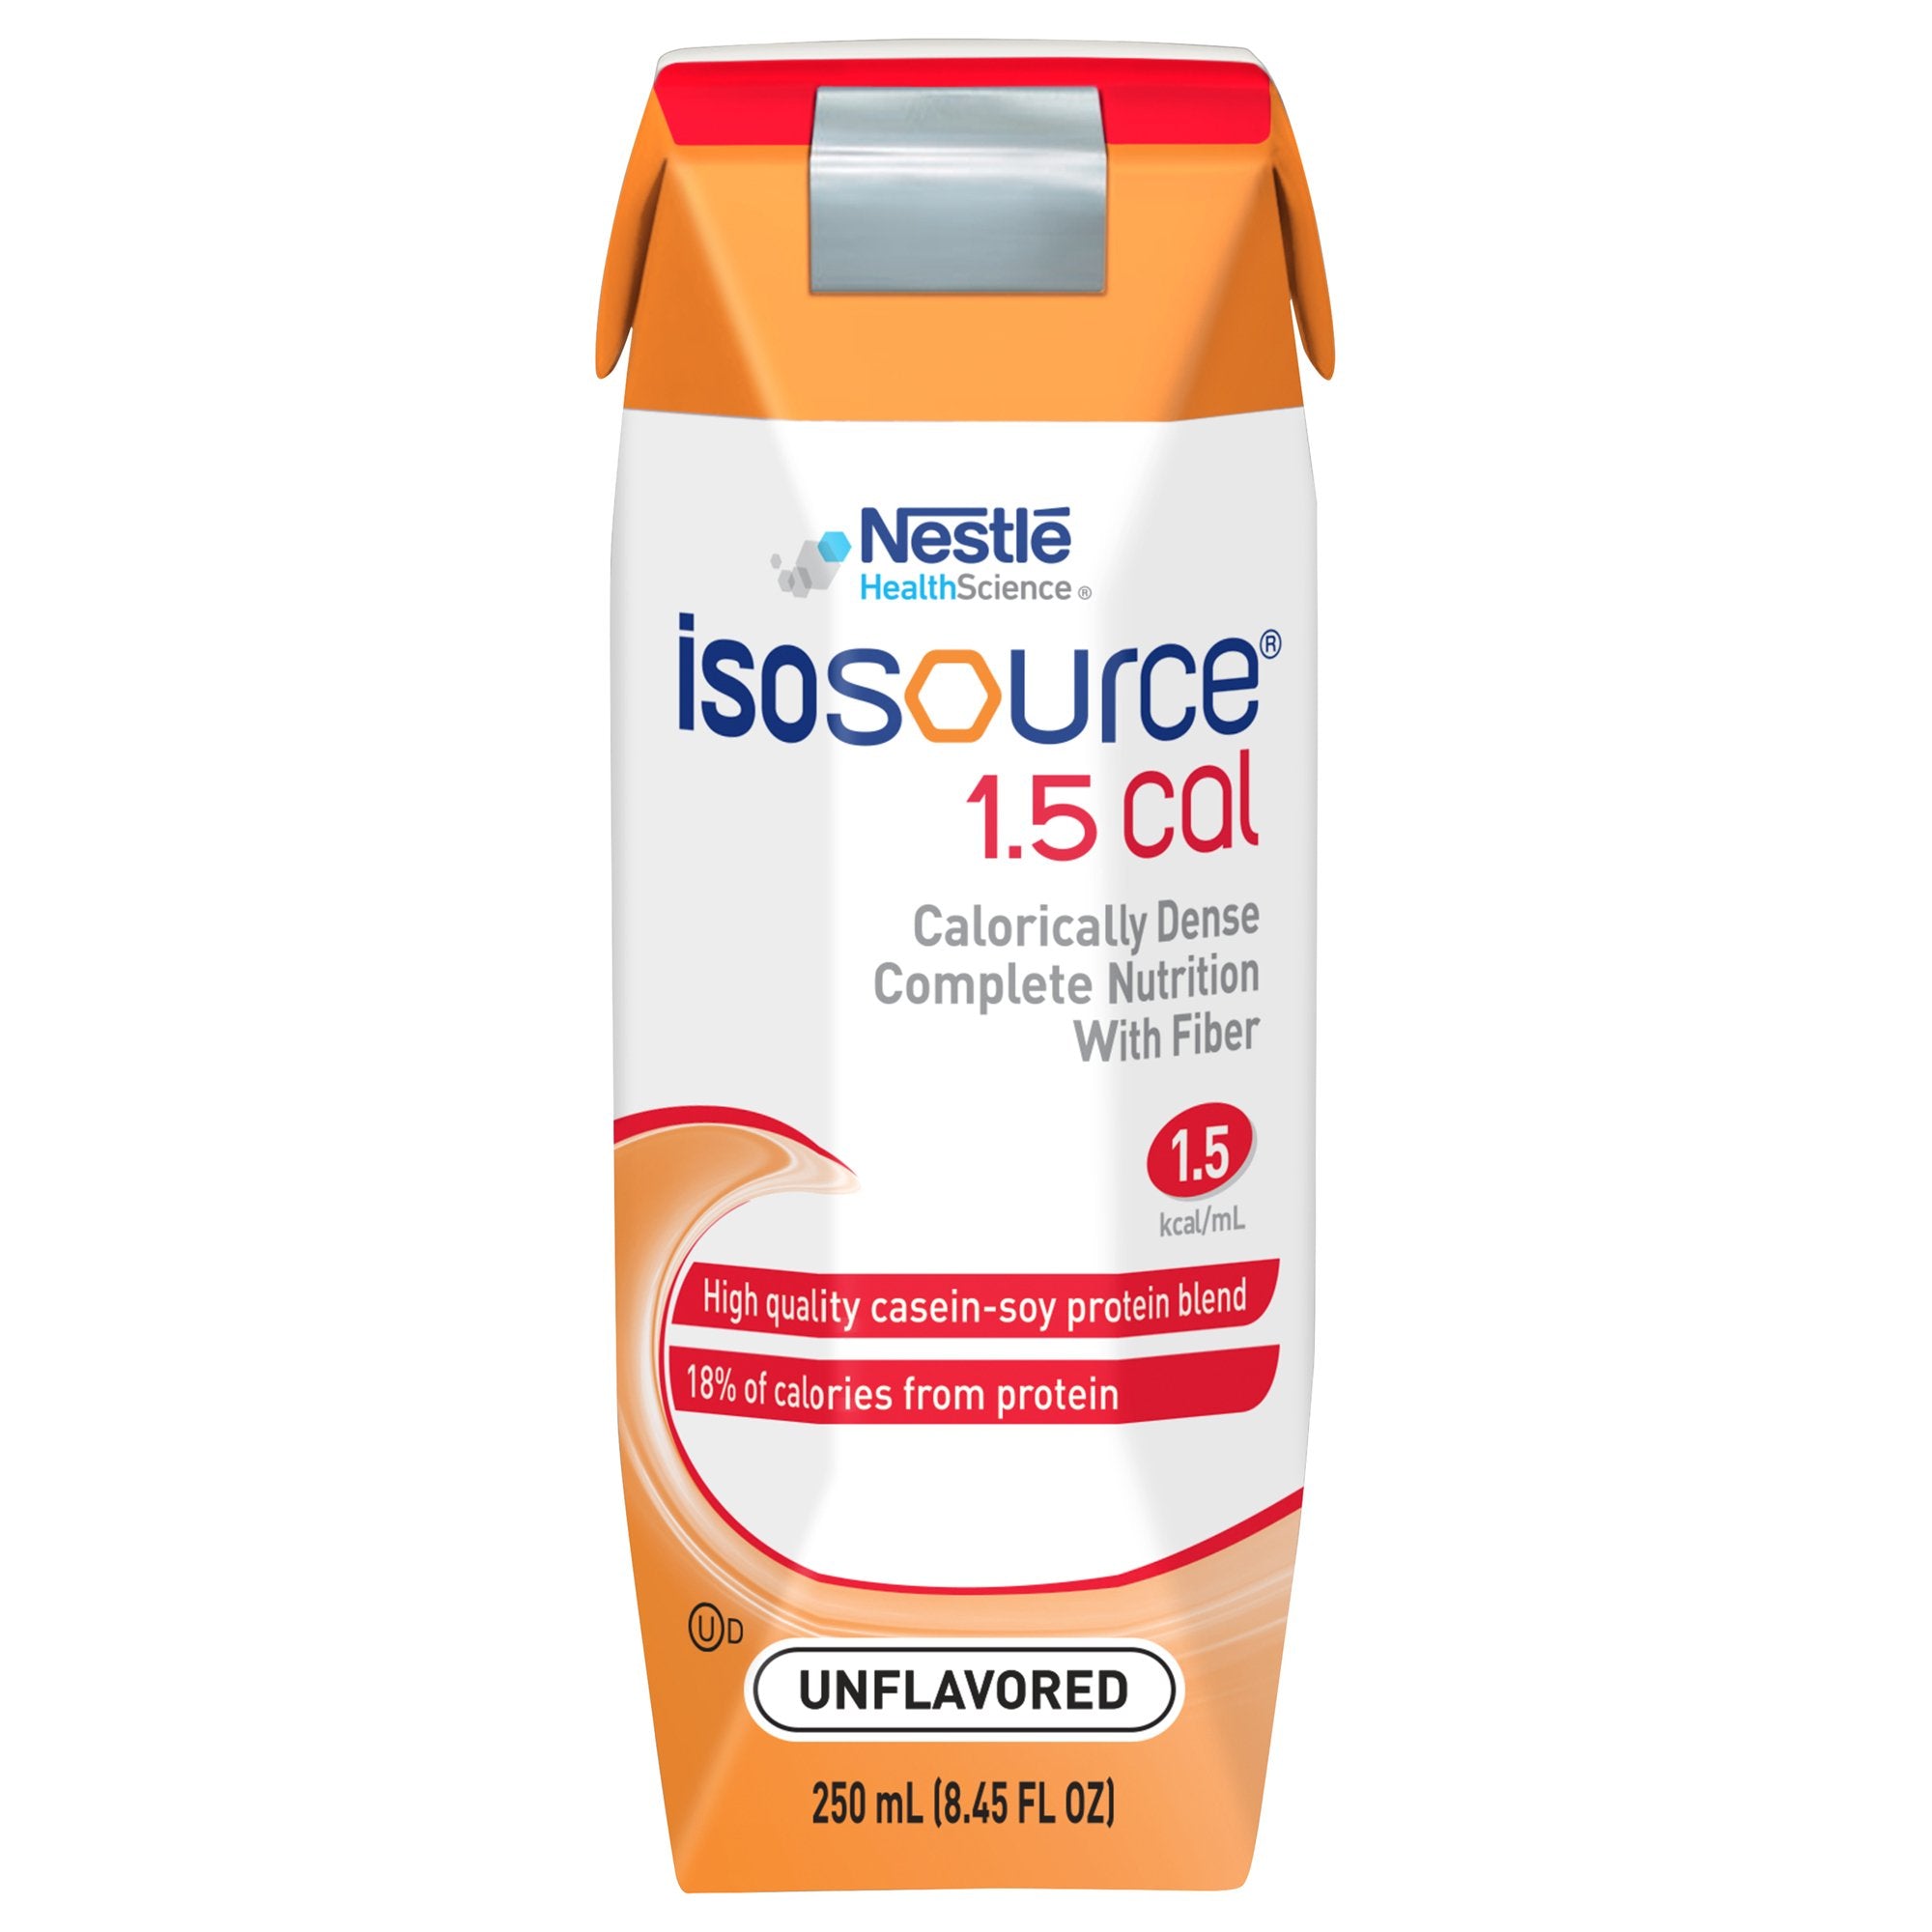 Isosource® 1.5 Cal 250ml Carton, Unflavored